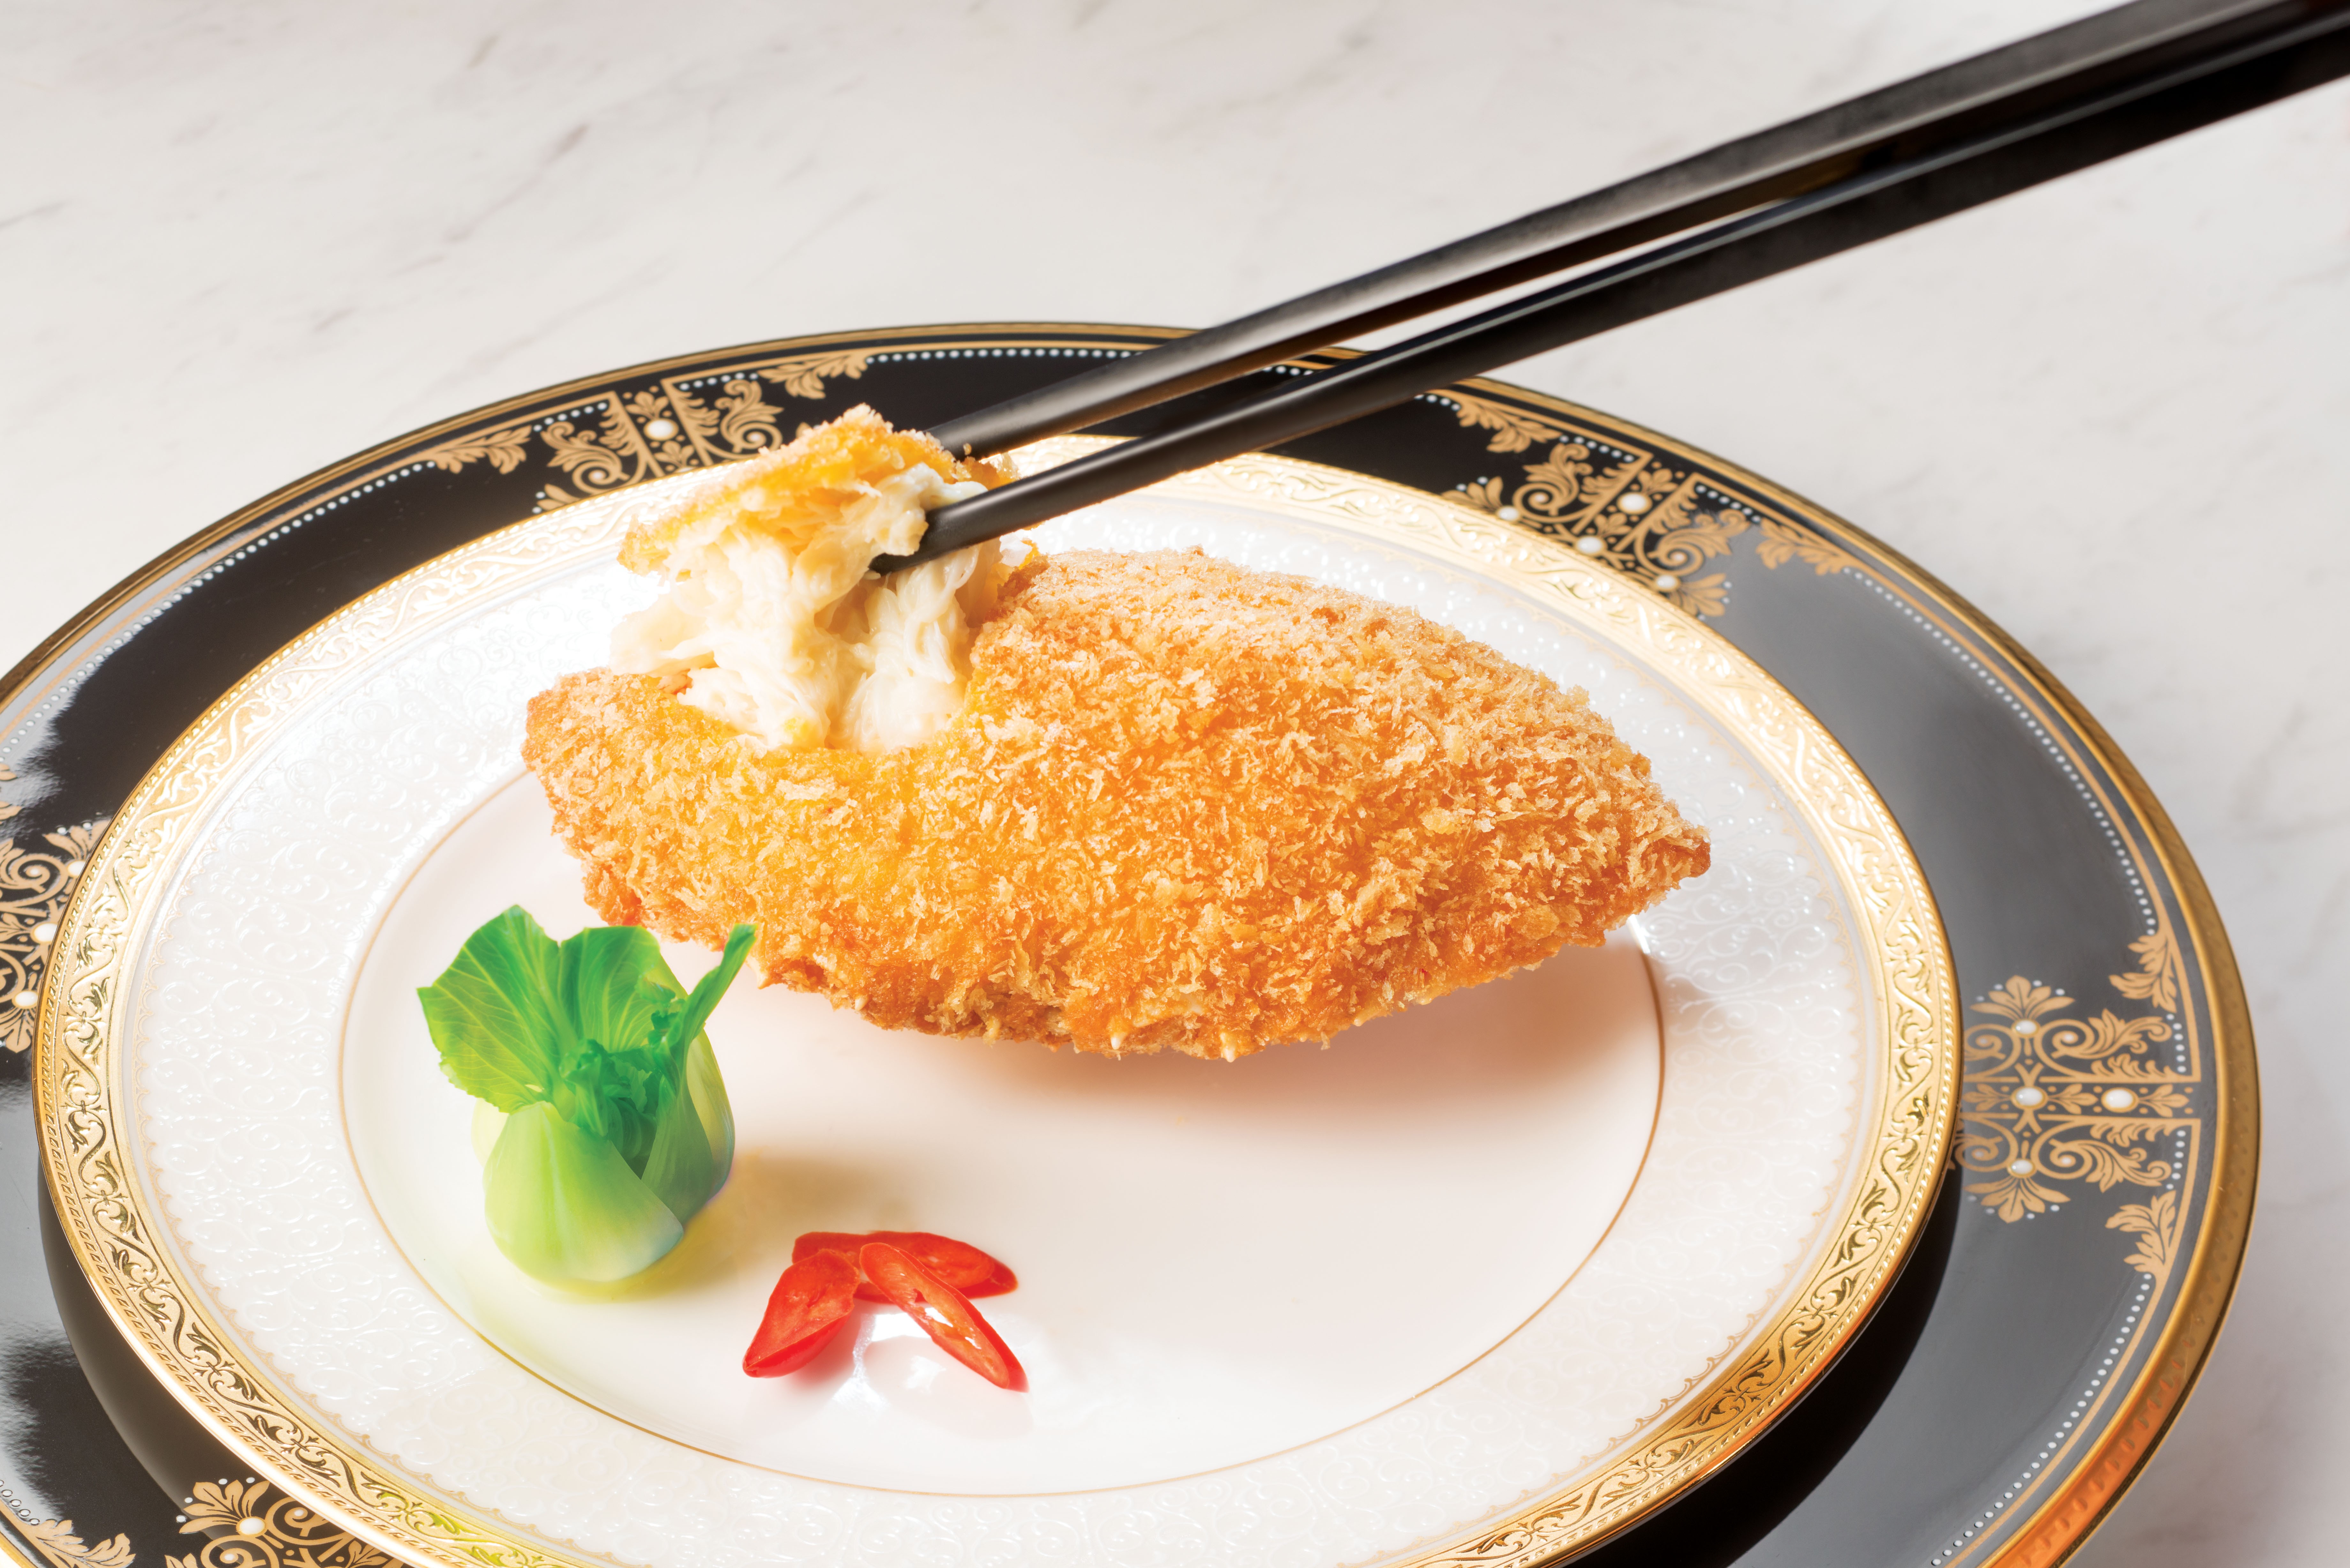 Crab shell from T’ang Court in Hong Kong. The restaurant has three Michelin stars.